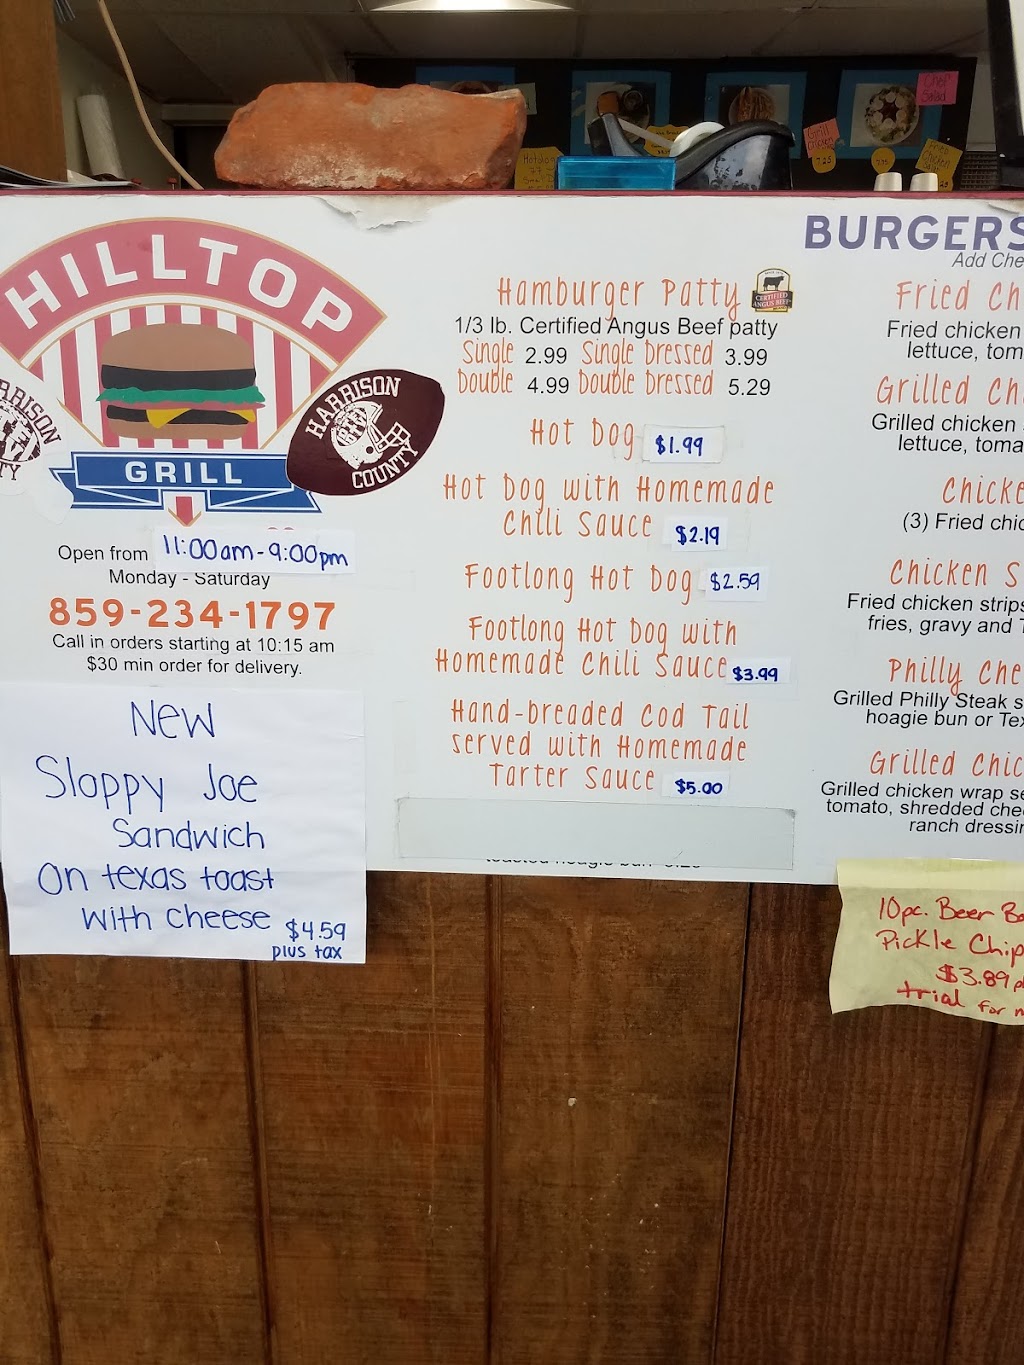 Hill Top Grill | 315 Webster Ave, Cynthiana, KY 41031 | Phone: (859) 234-1797